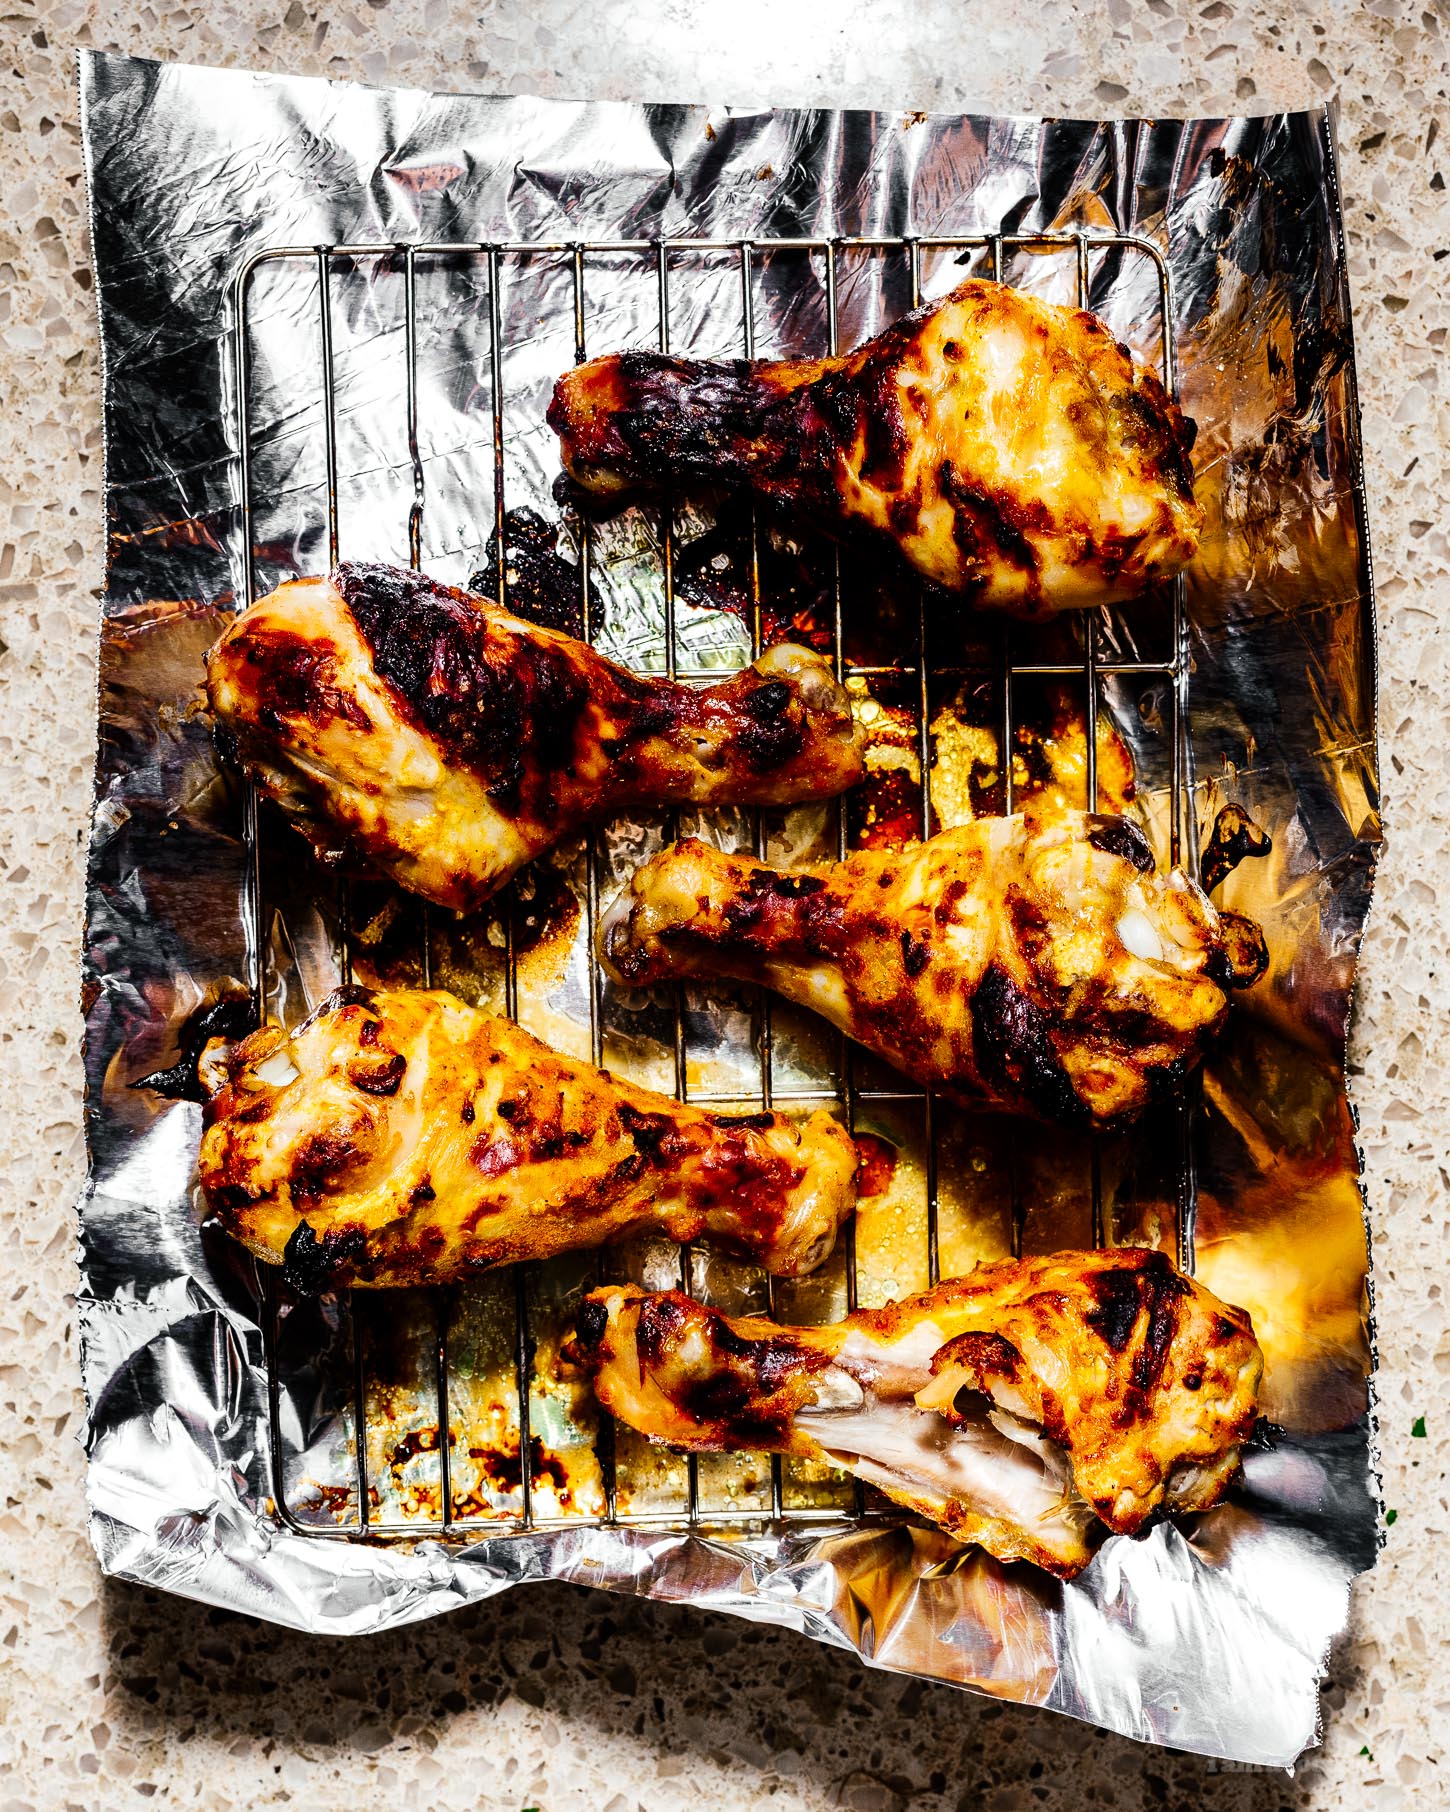 The Easiest 8 Ingredient Oven Broiled Tandoori Chicken Recipe | www.iamafoodblog.com